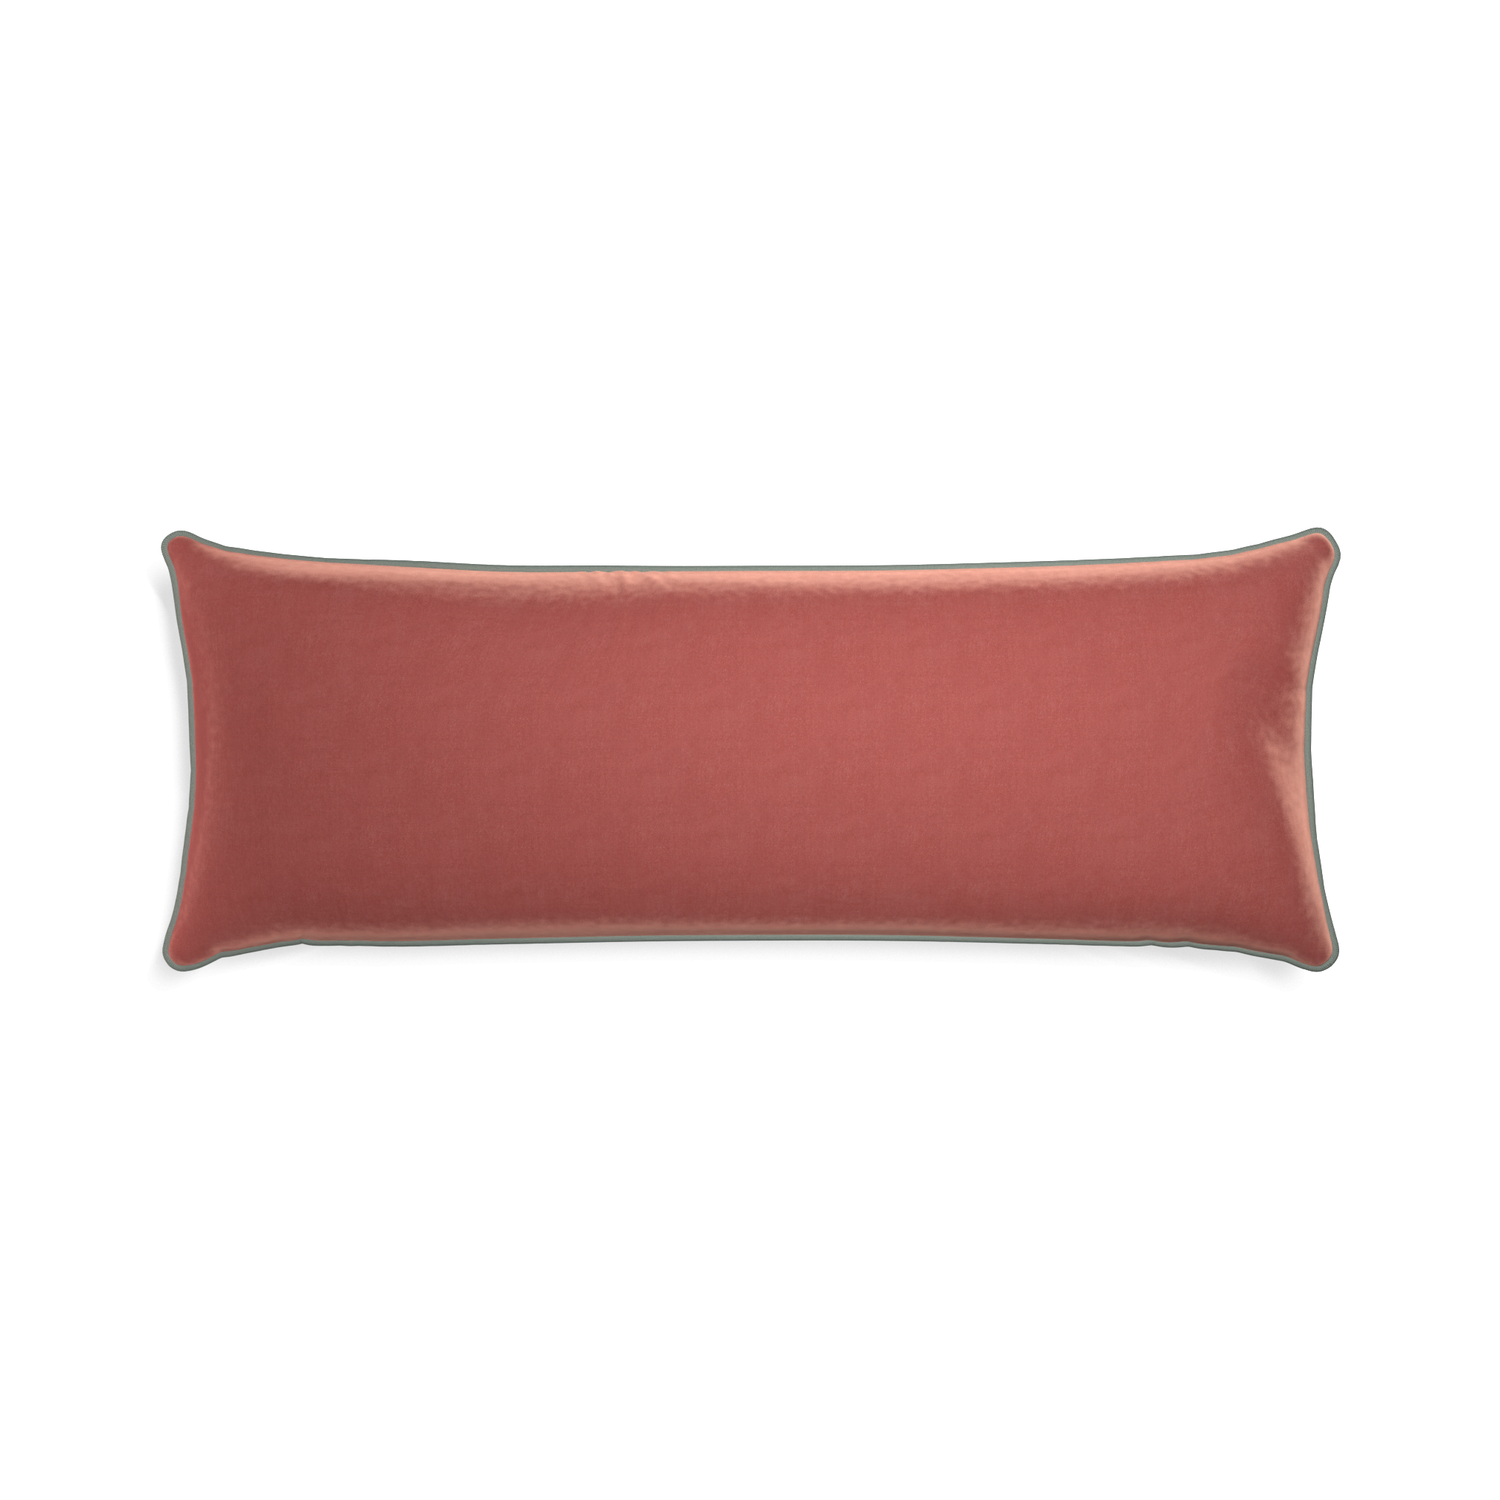 Xl-lumbar cosmo velvet custom coralpillow with sage piping on white background